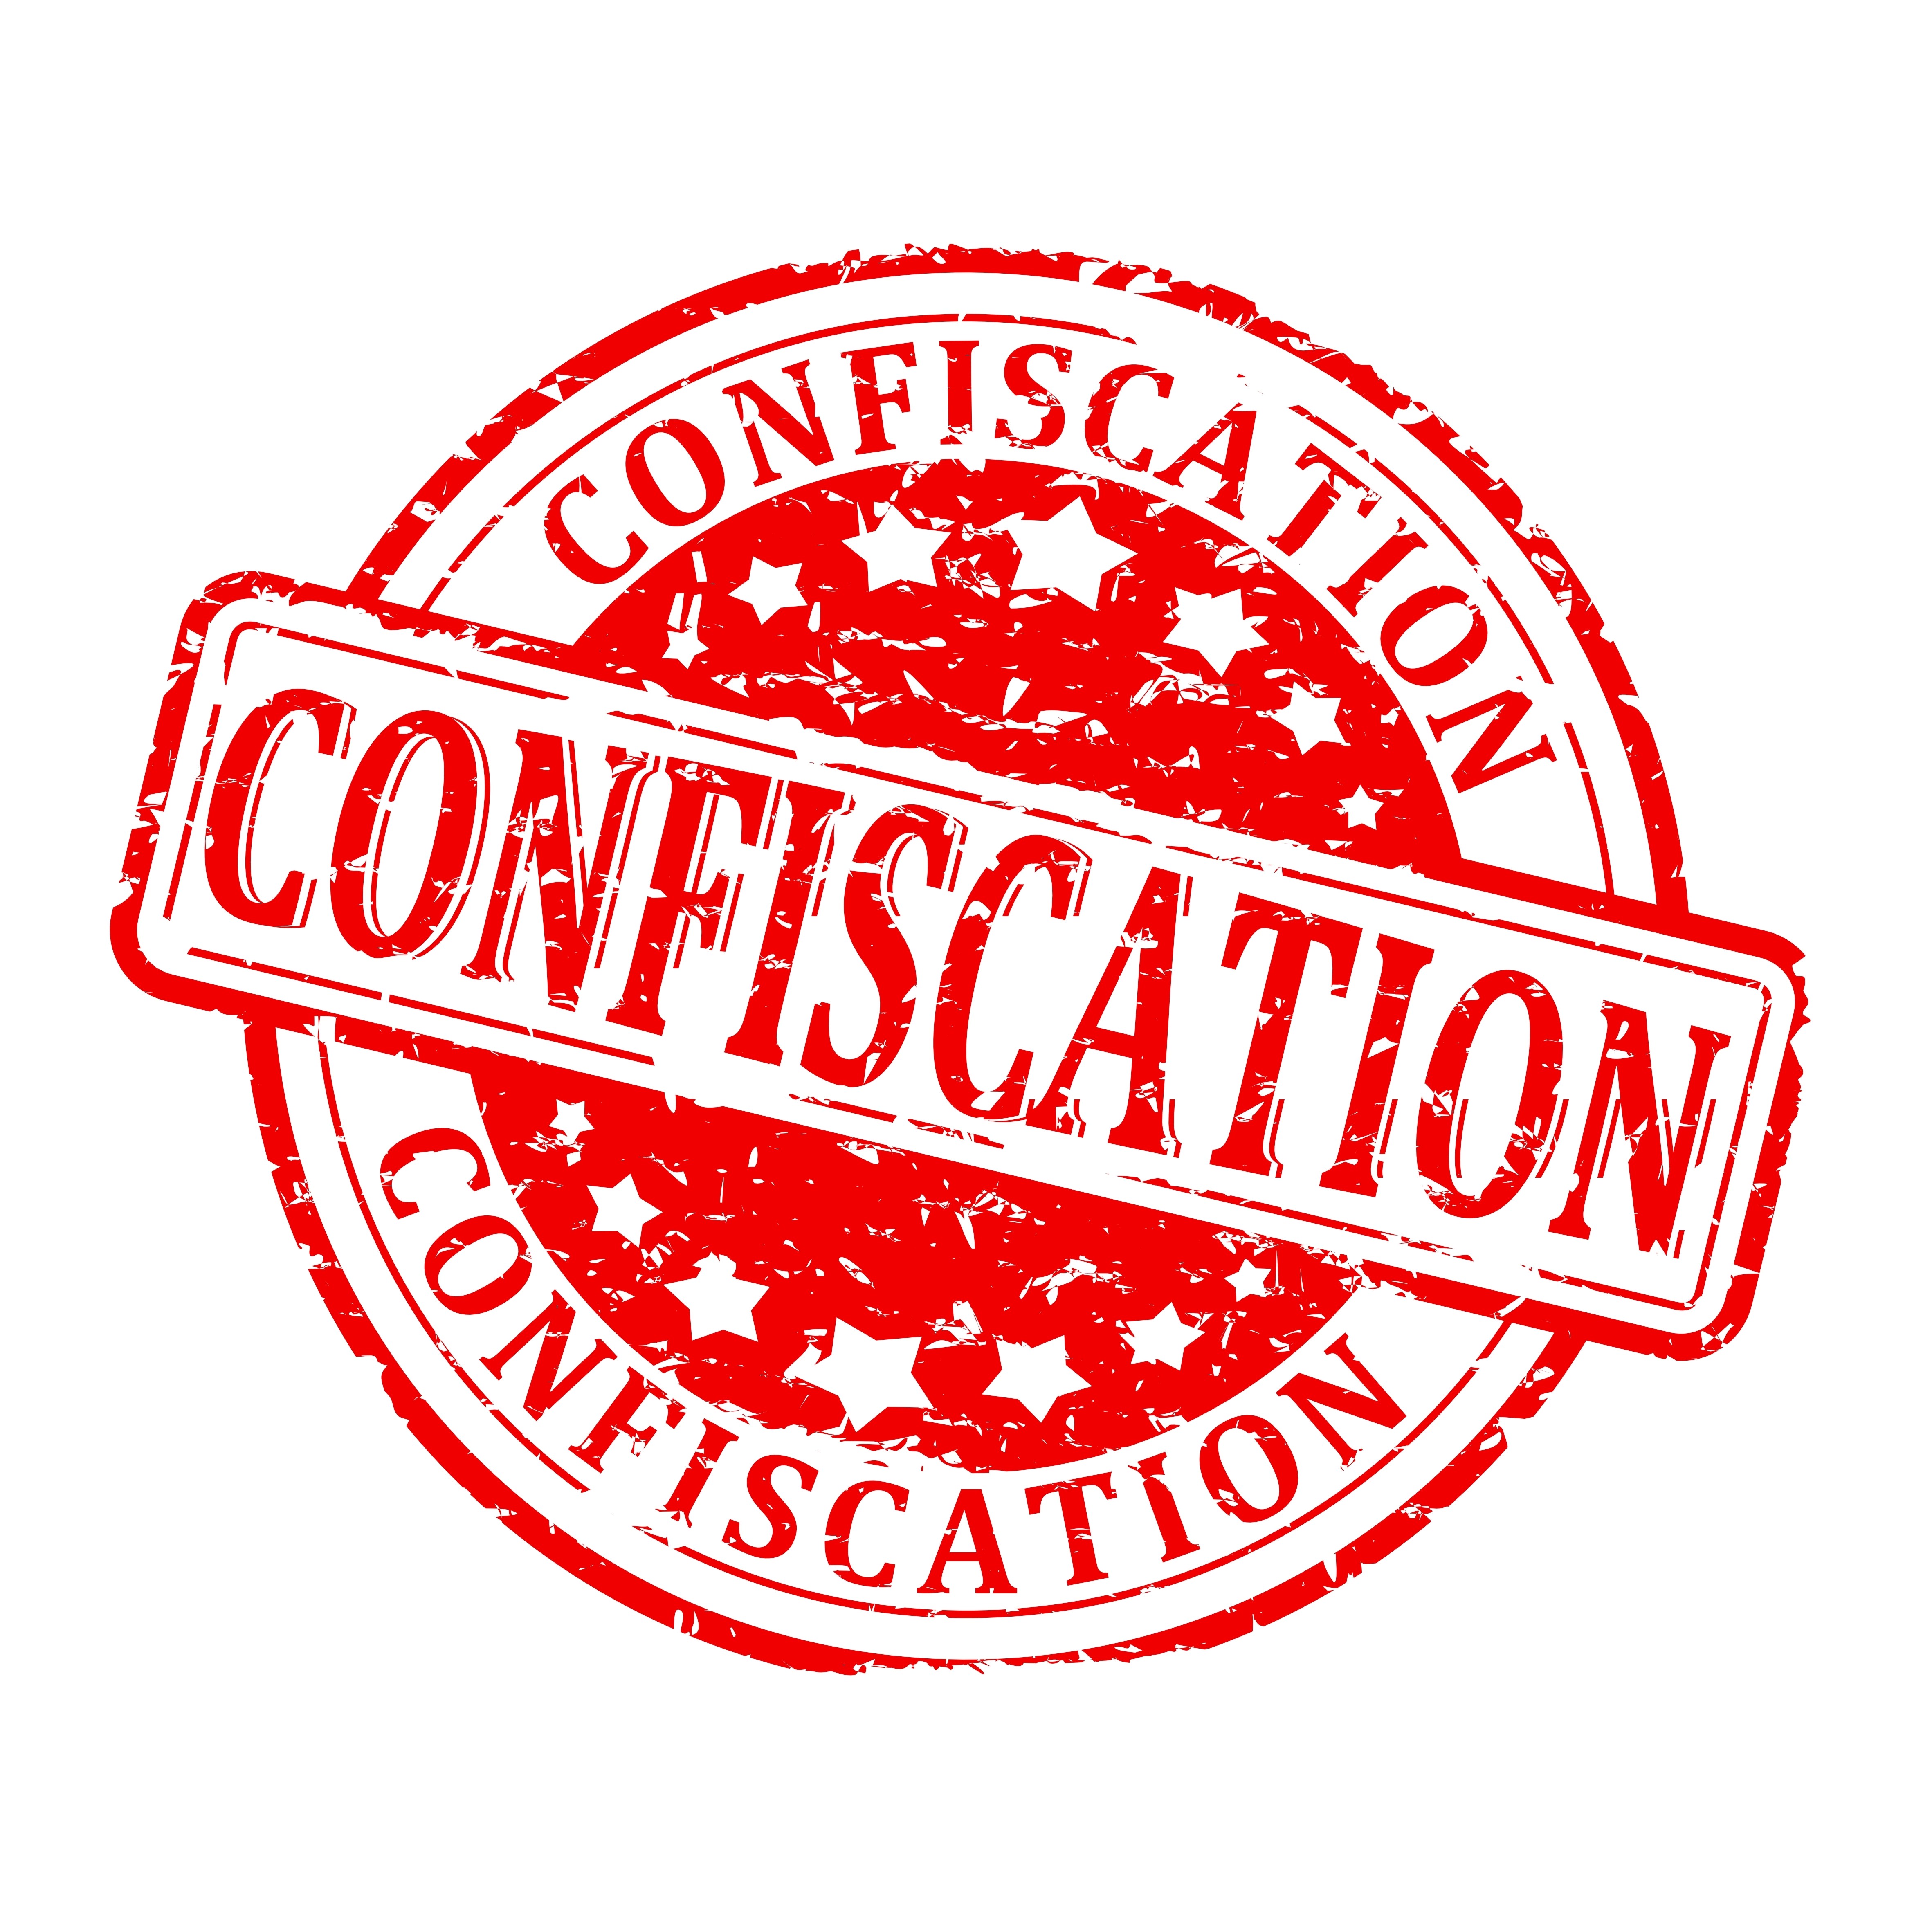 confiscation proceedings